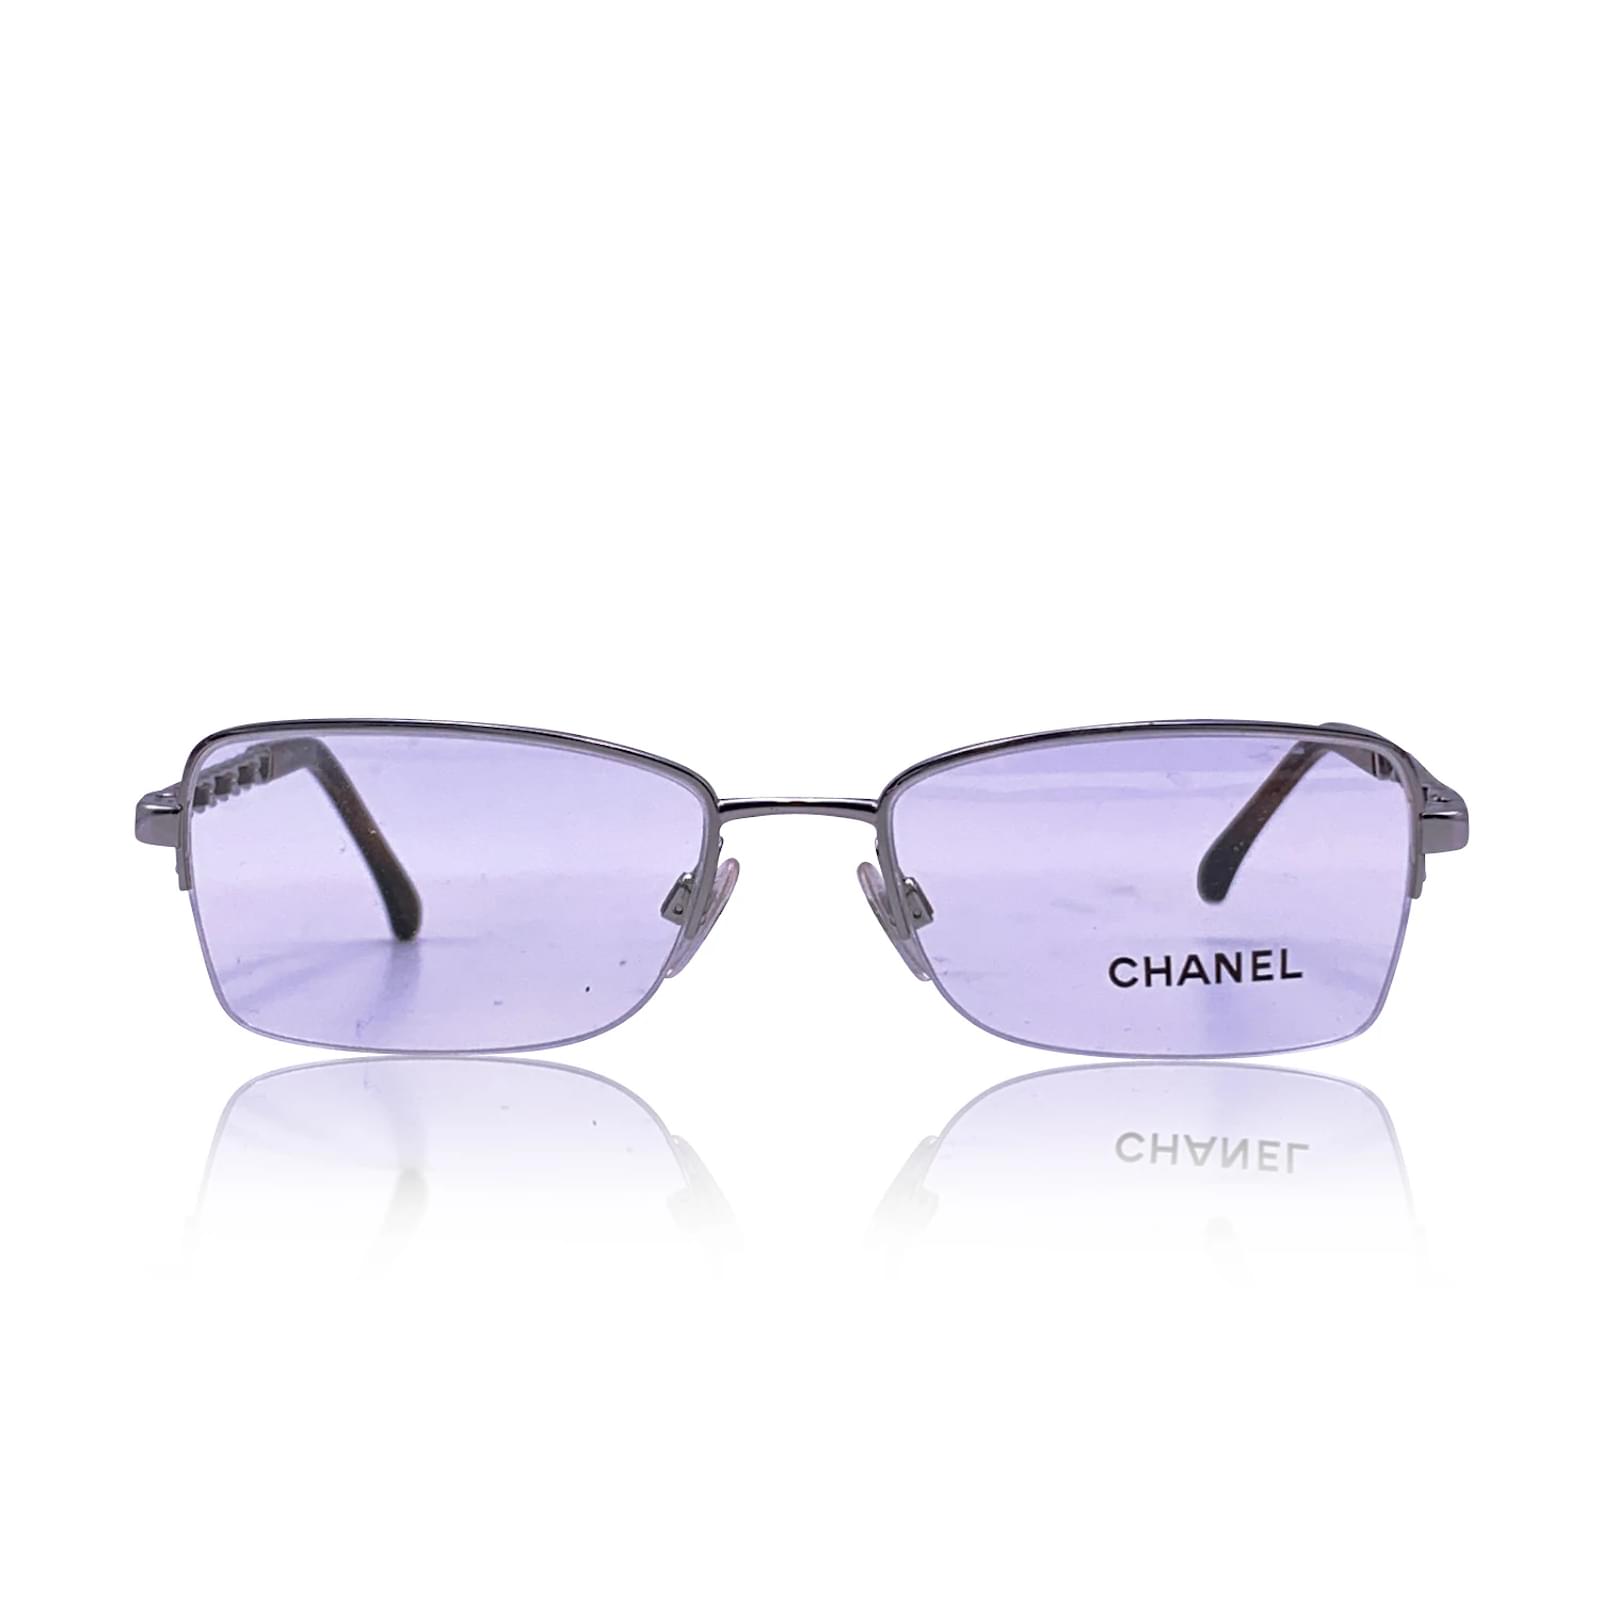 Authentic Chanel 2104 c.108 Silver 52mm Foldable Frames Glasses